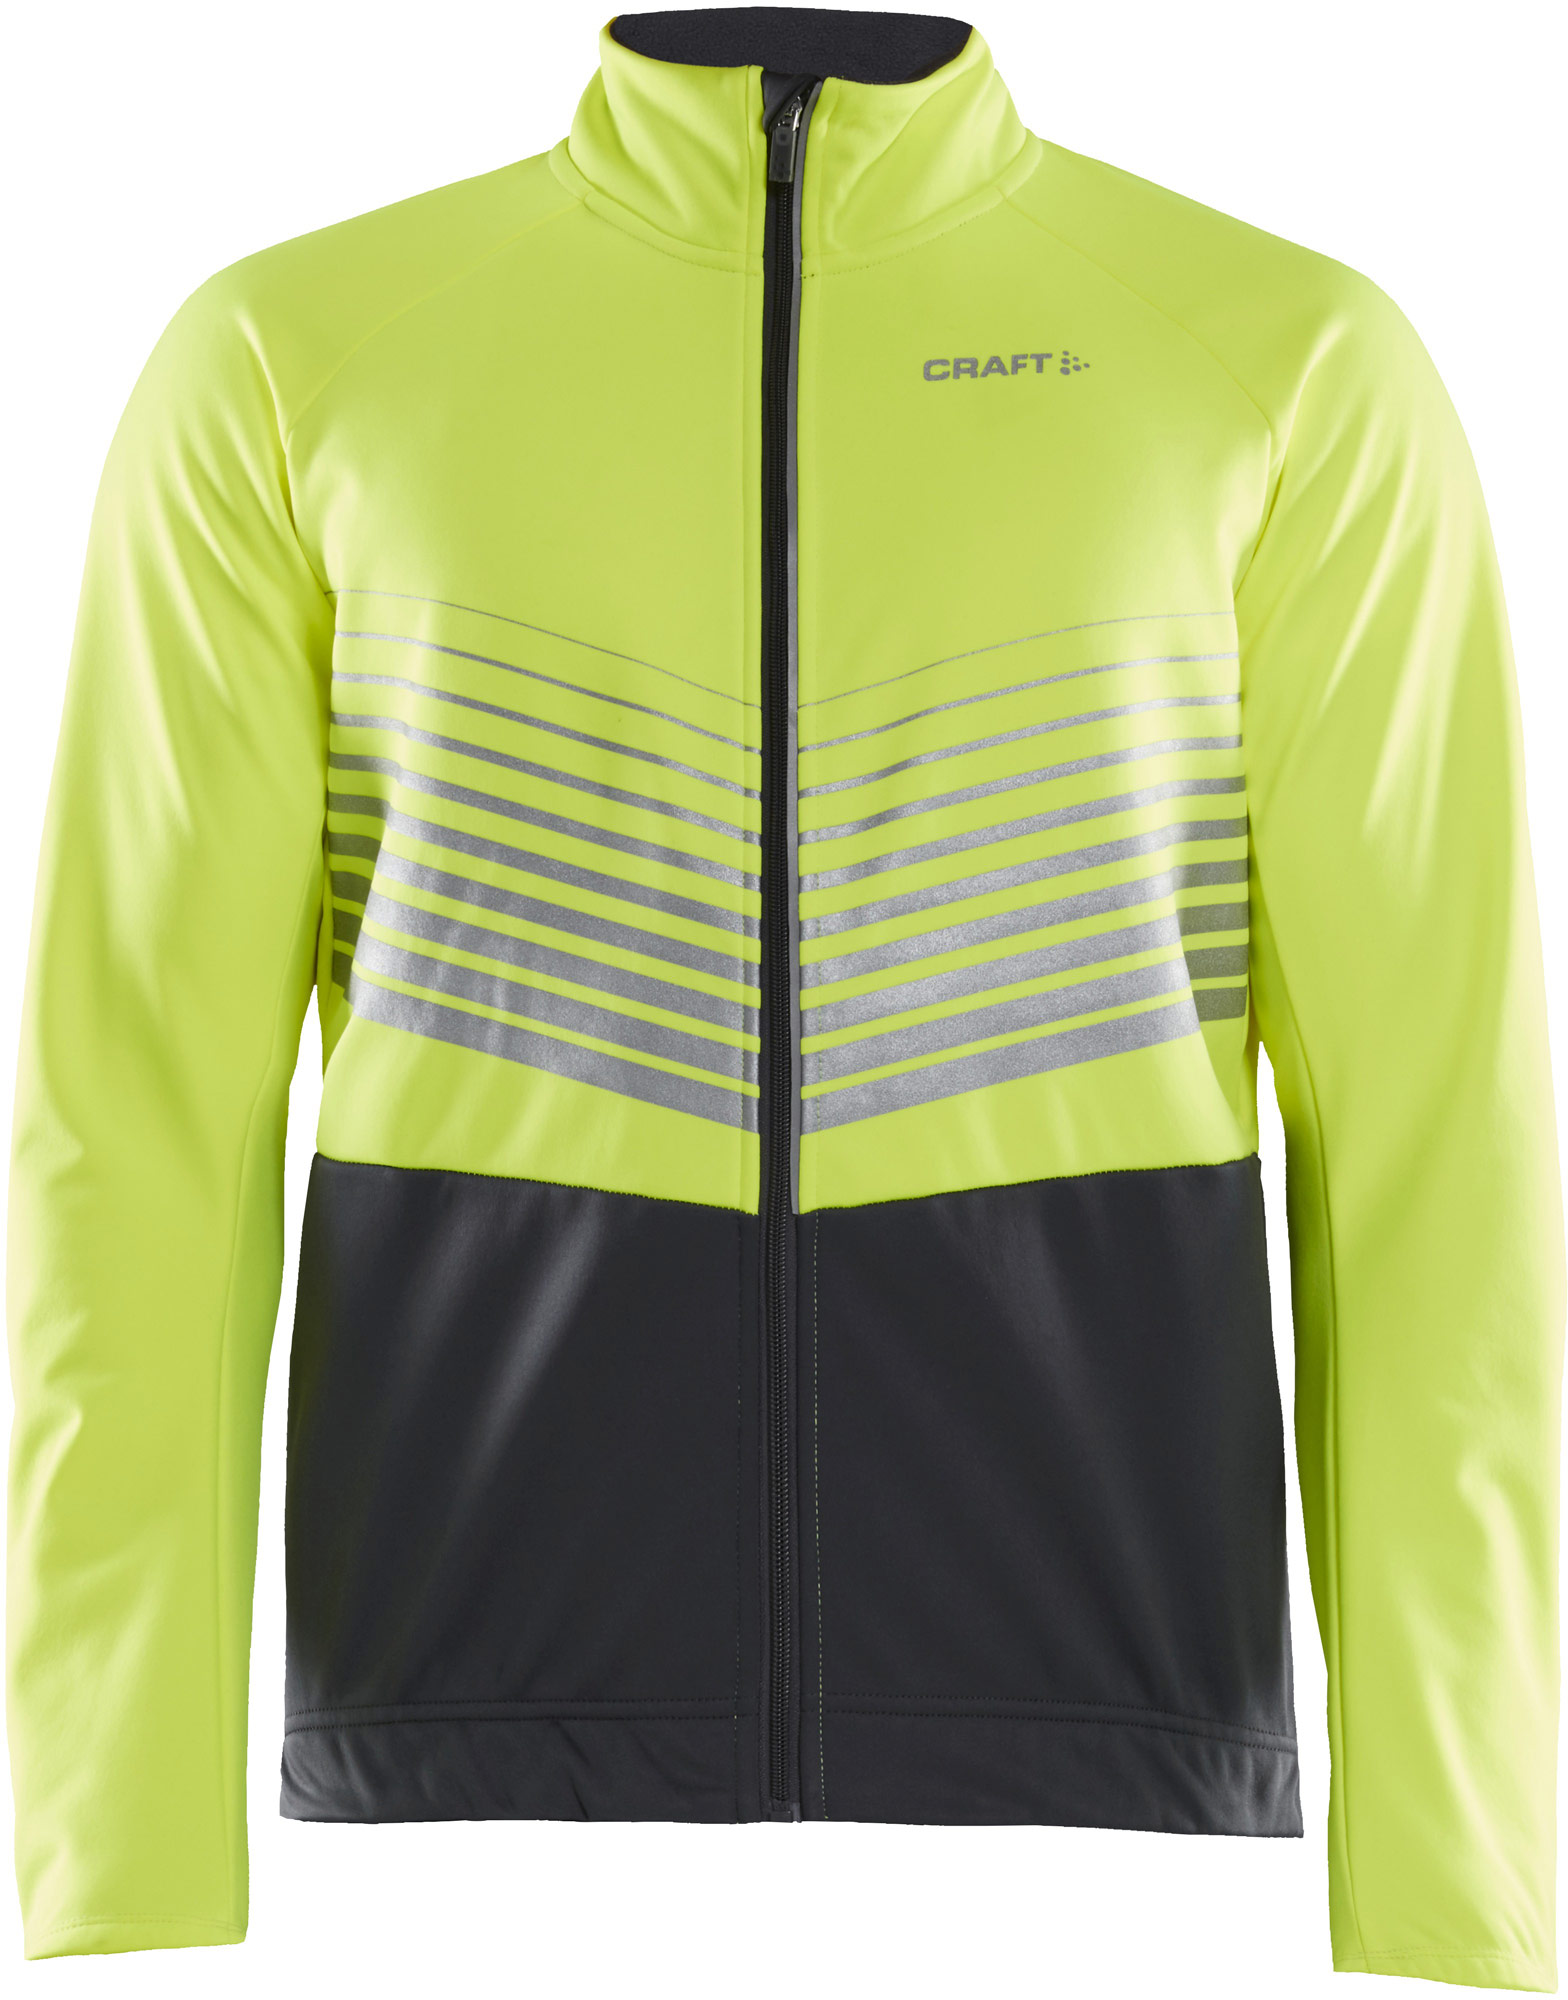 Men’s insulated cycling jacket